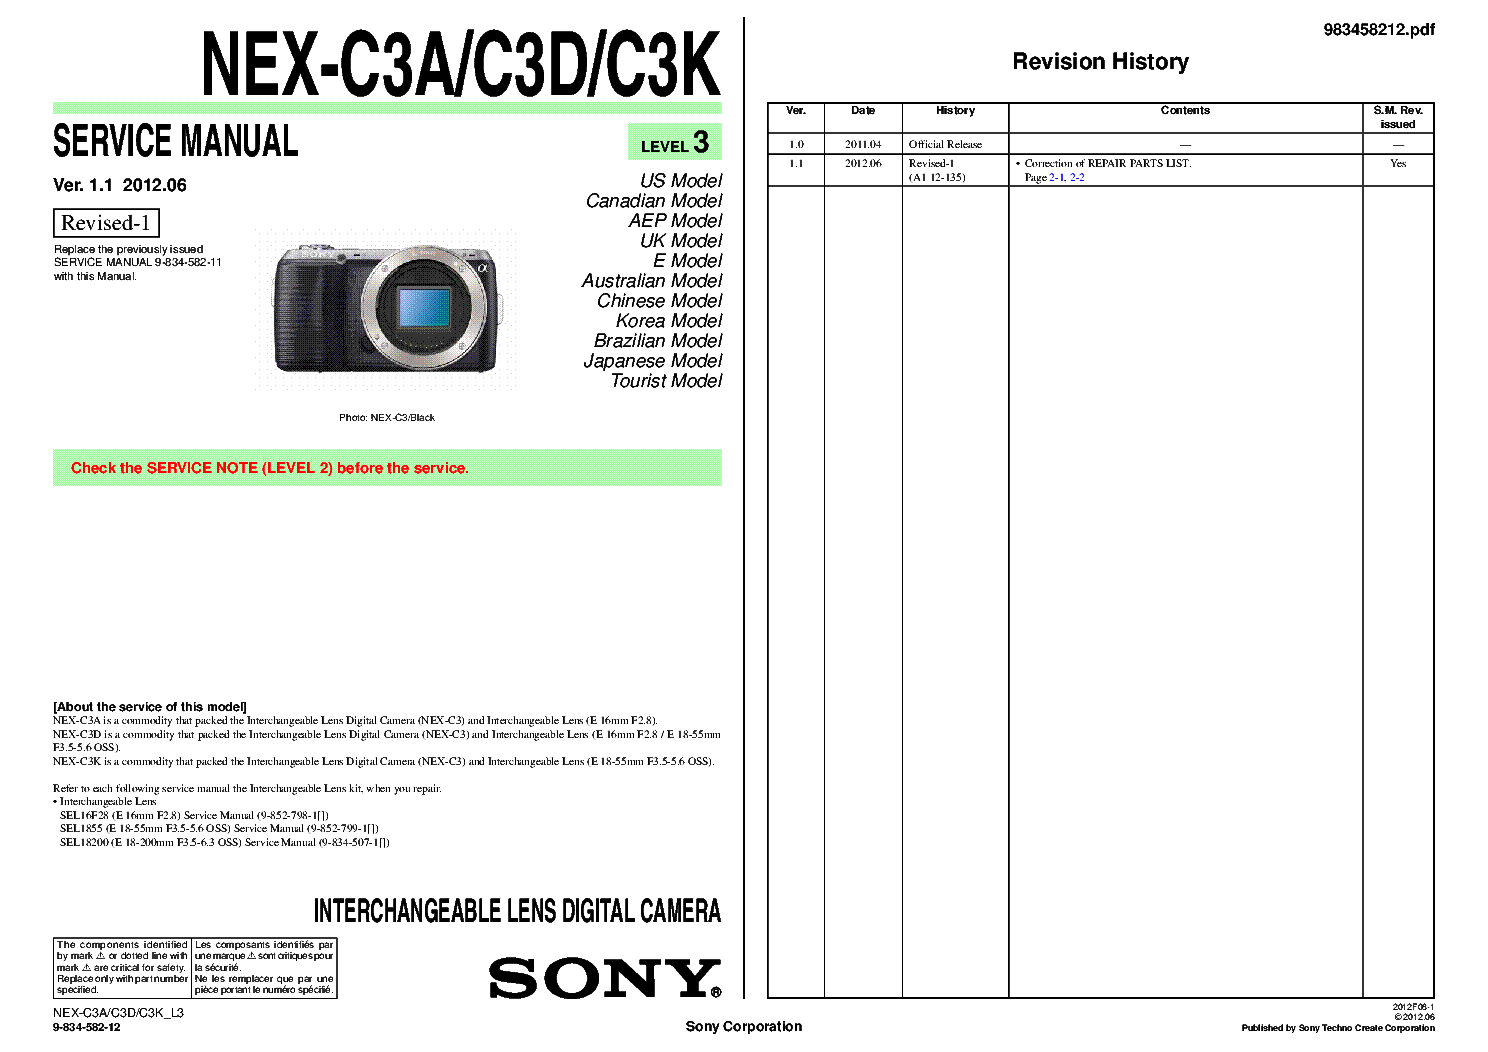 SONY NEX-C3A NEX-C3D NEX-C3K VER1.1 SM service manual (1st page)